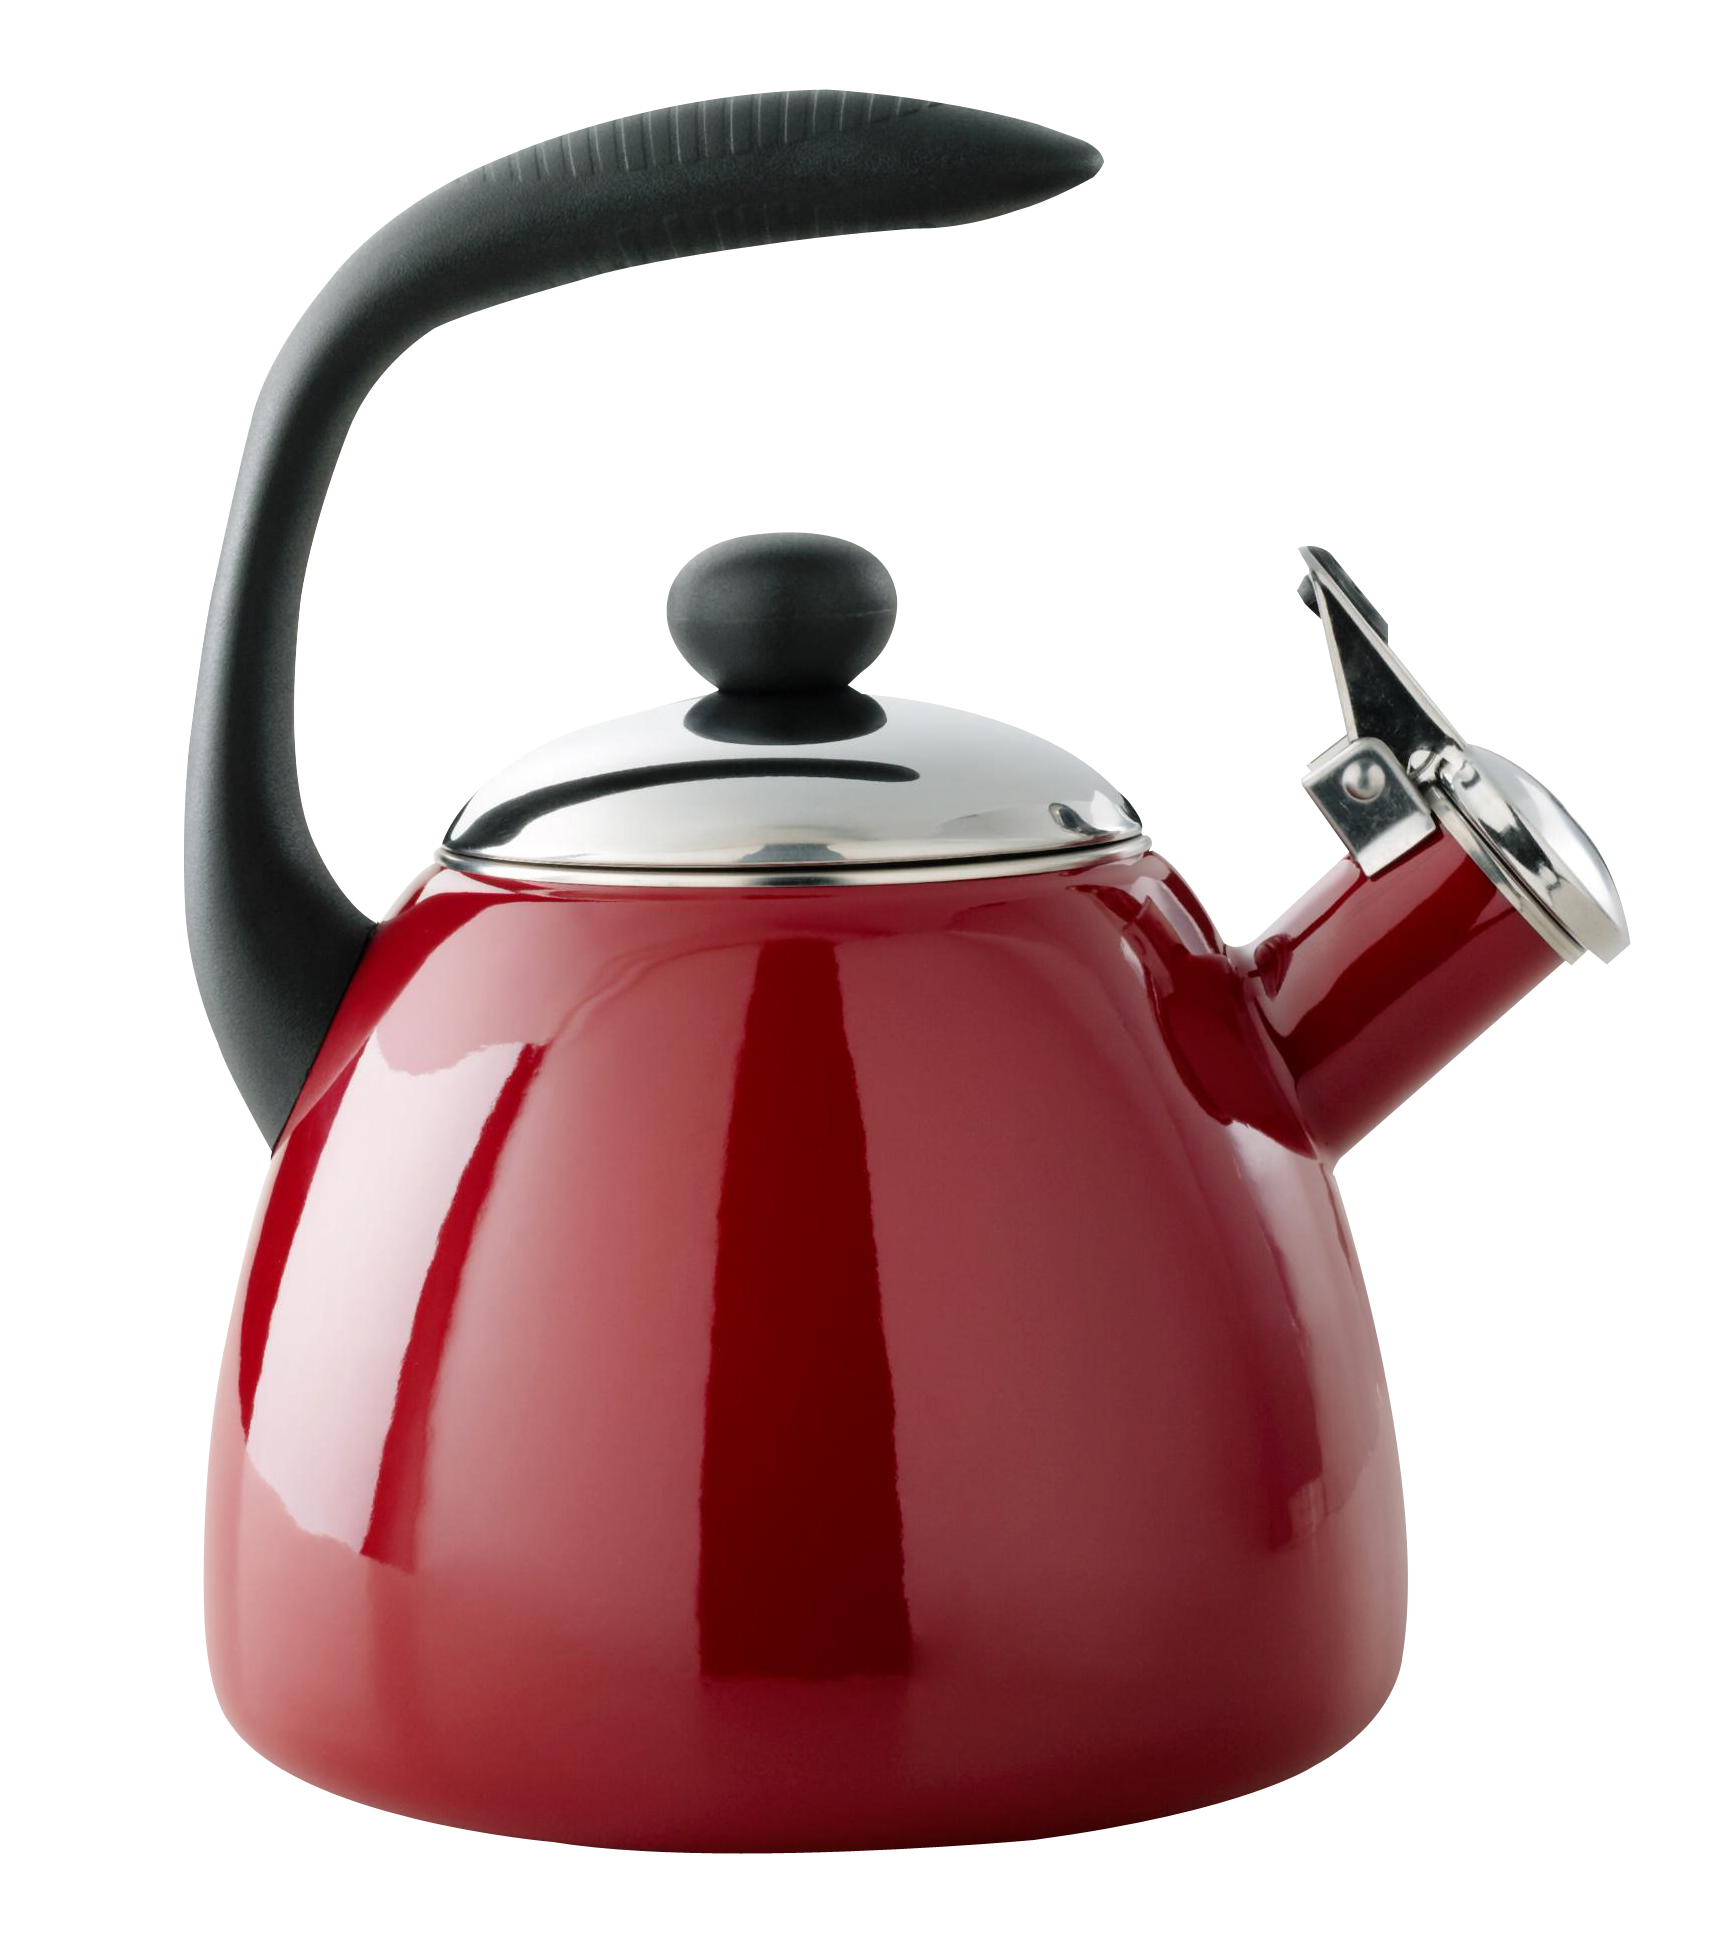 A Red Tea Kettle With A Black Handle